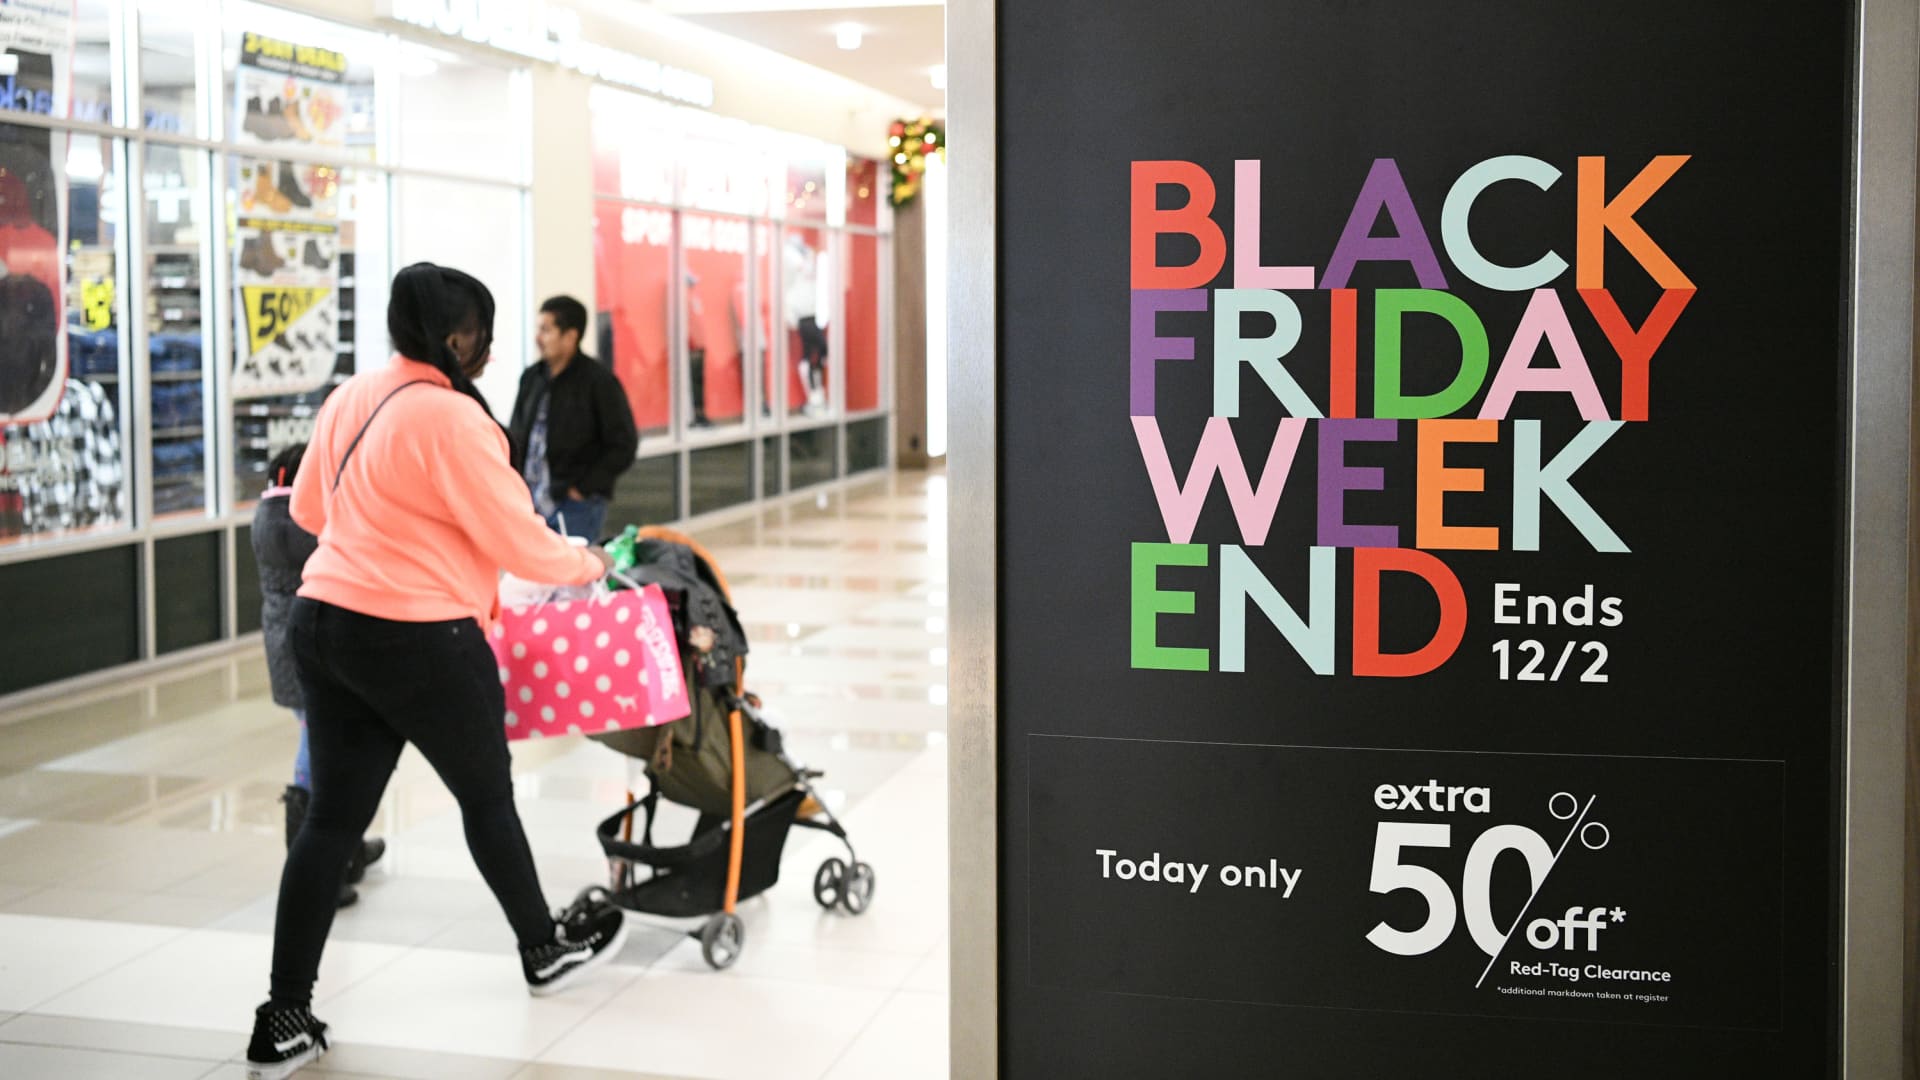 Holiday shoppers look for deals during the Black Friday sales event at the Pentagon Centre shopping mall in Arlington, Virginia, November 29, 2019.